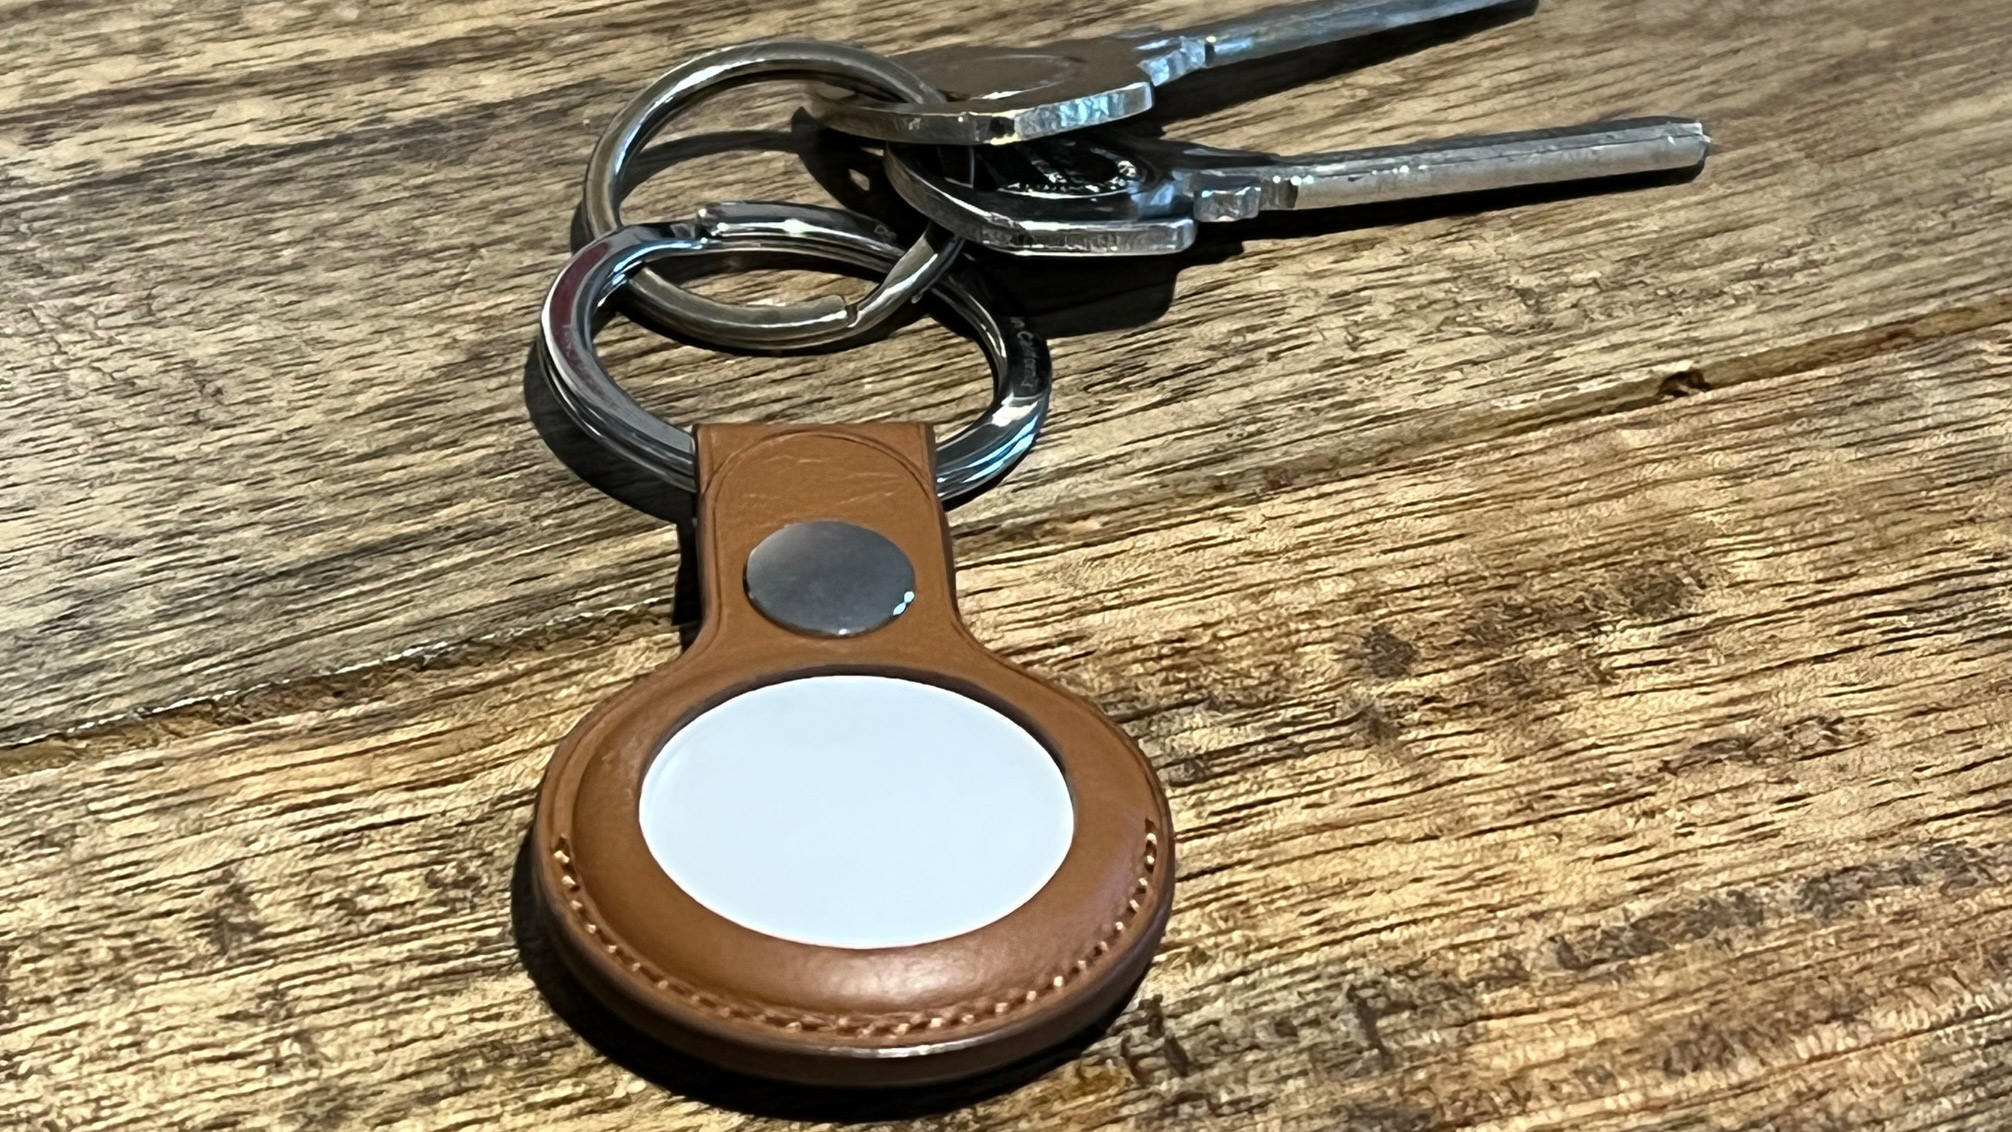 Apple AirTag in a brown leather key case attached to some keys on a wooden surface